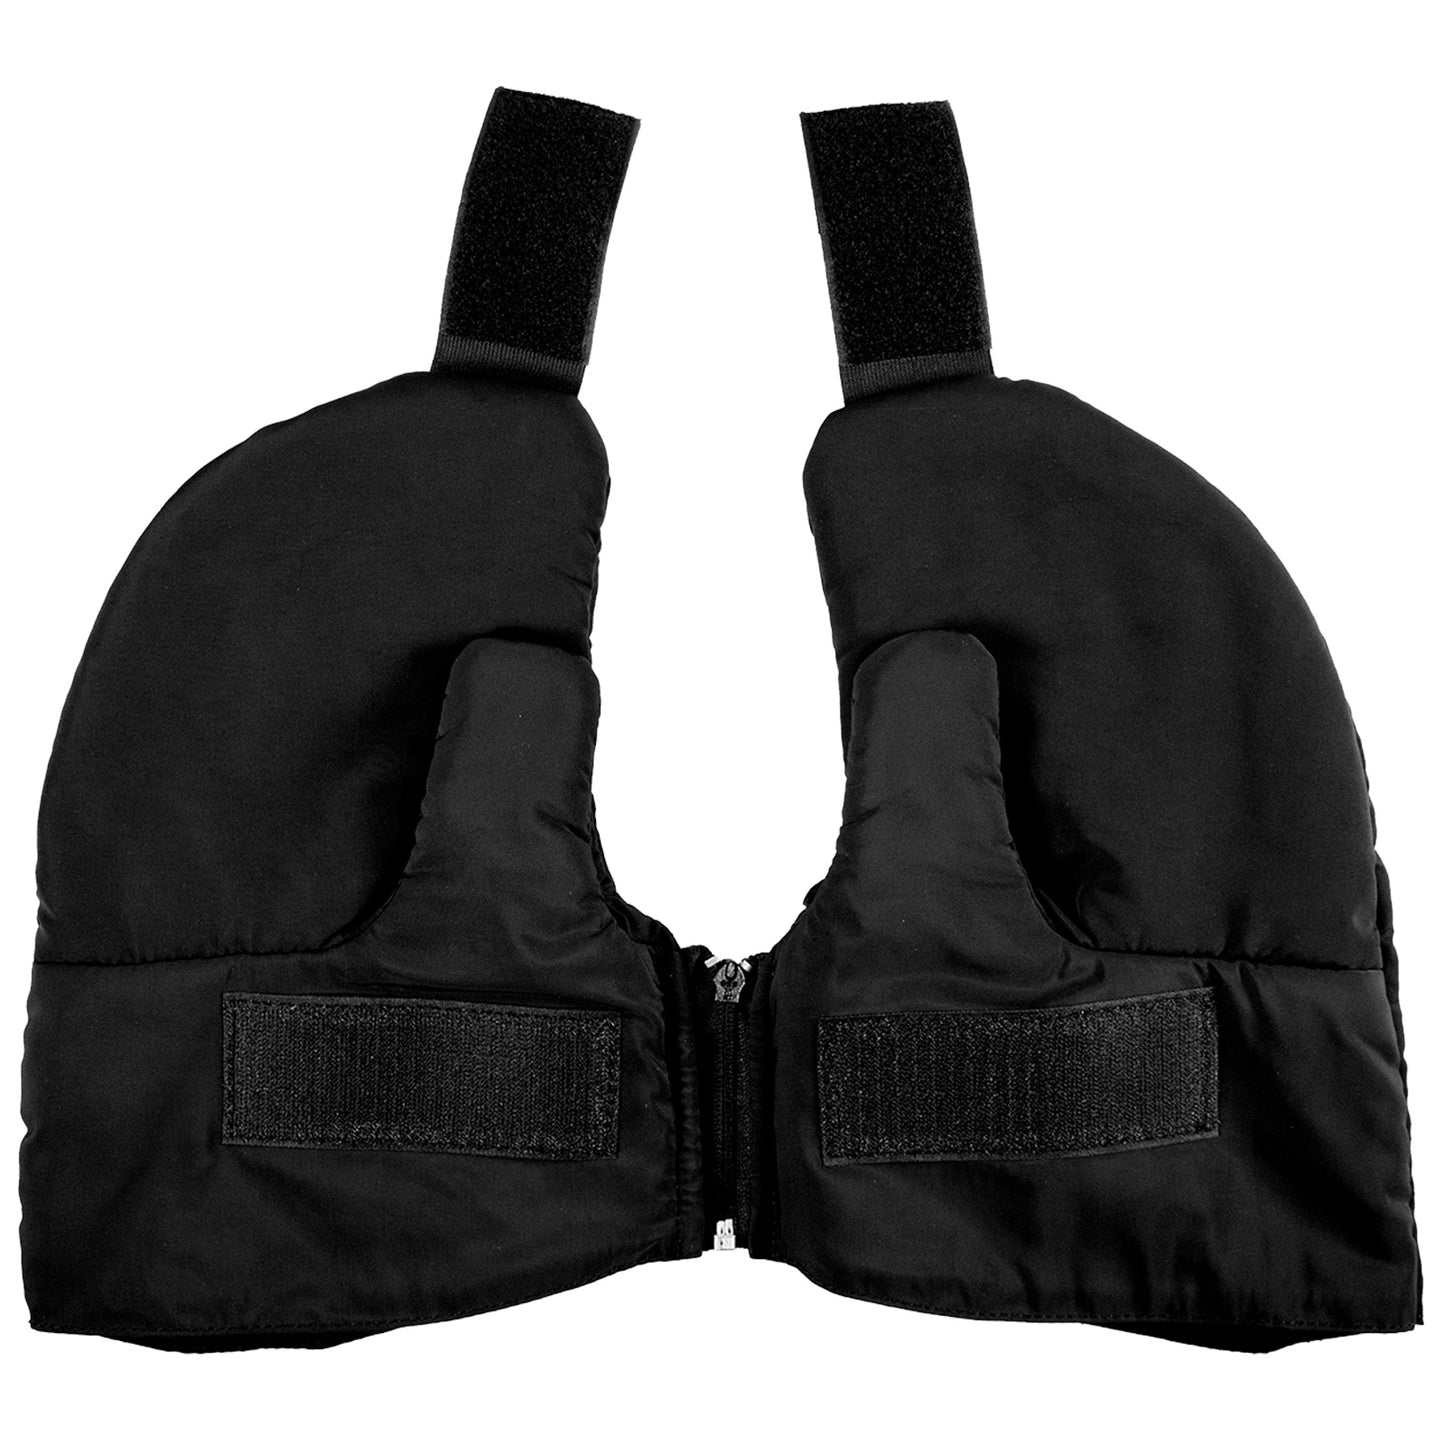 FastFold Trolley Cart Mitts